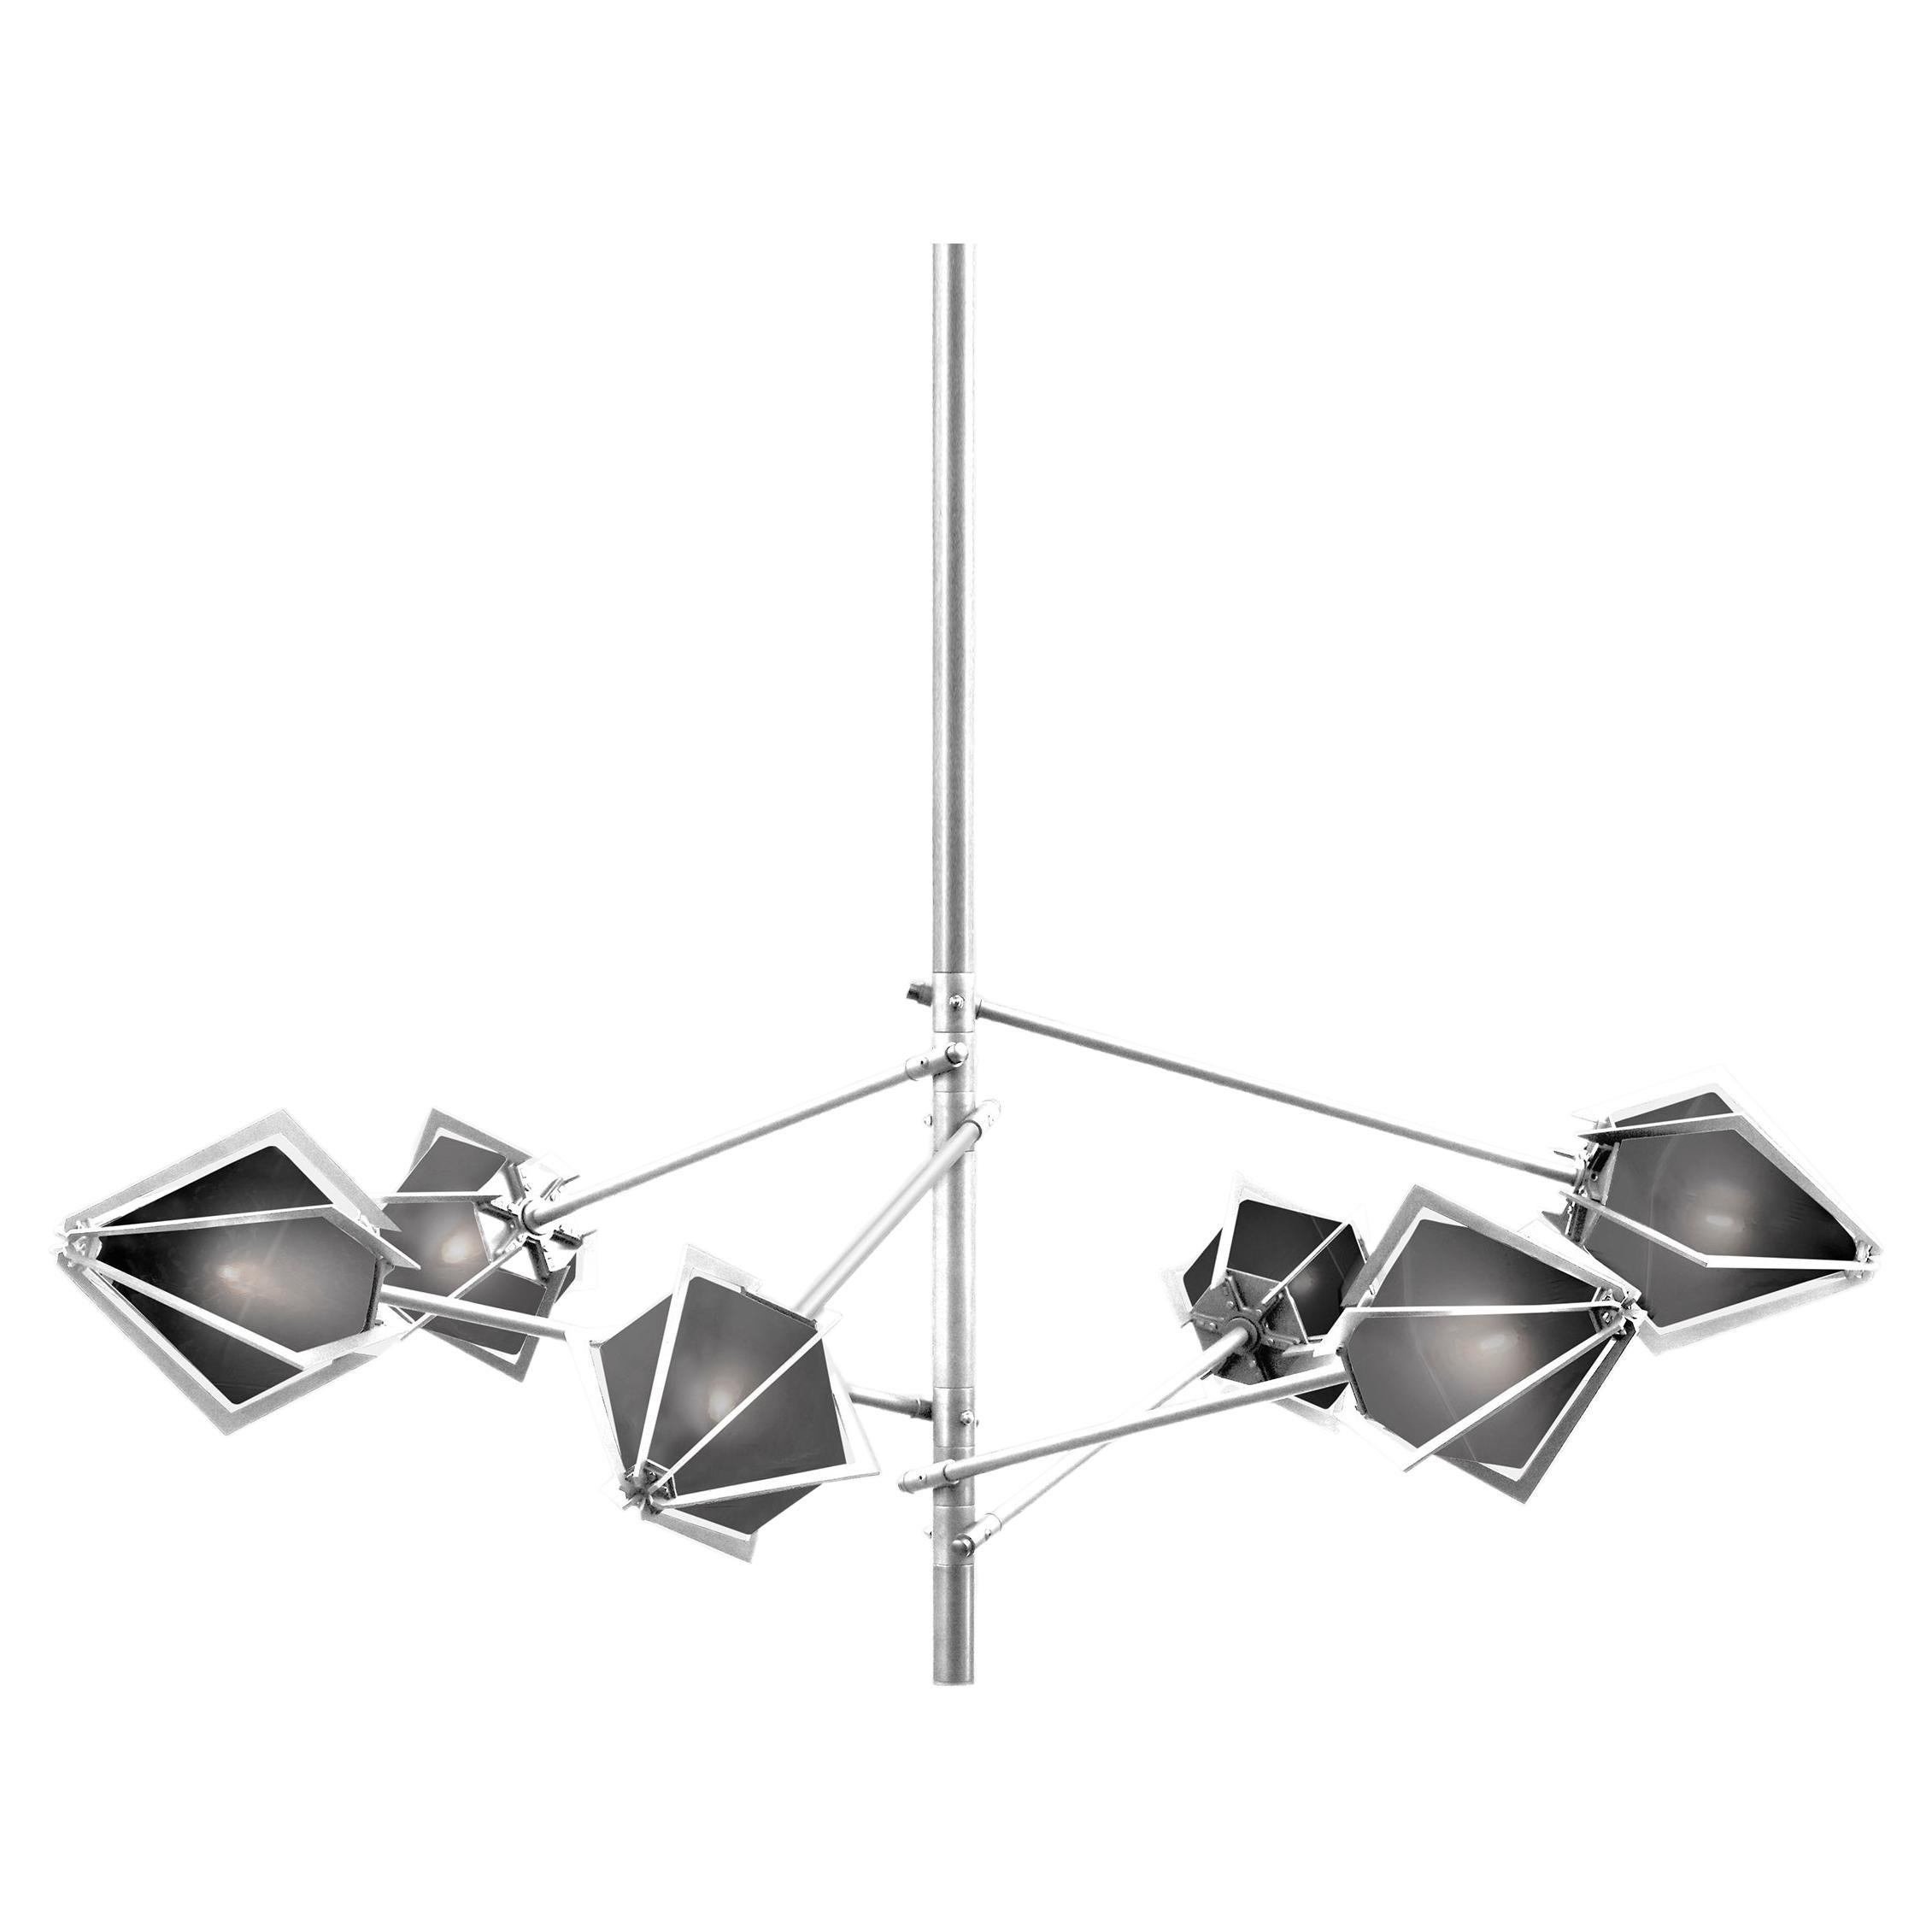 Harlow Spoke Chandelier Small in Satin Nickel and Smoked Gray Glass